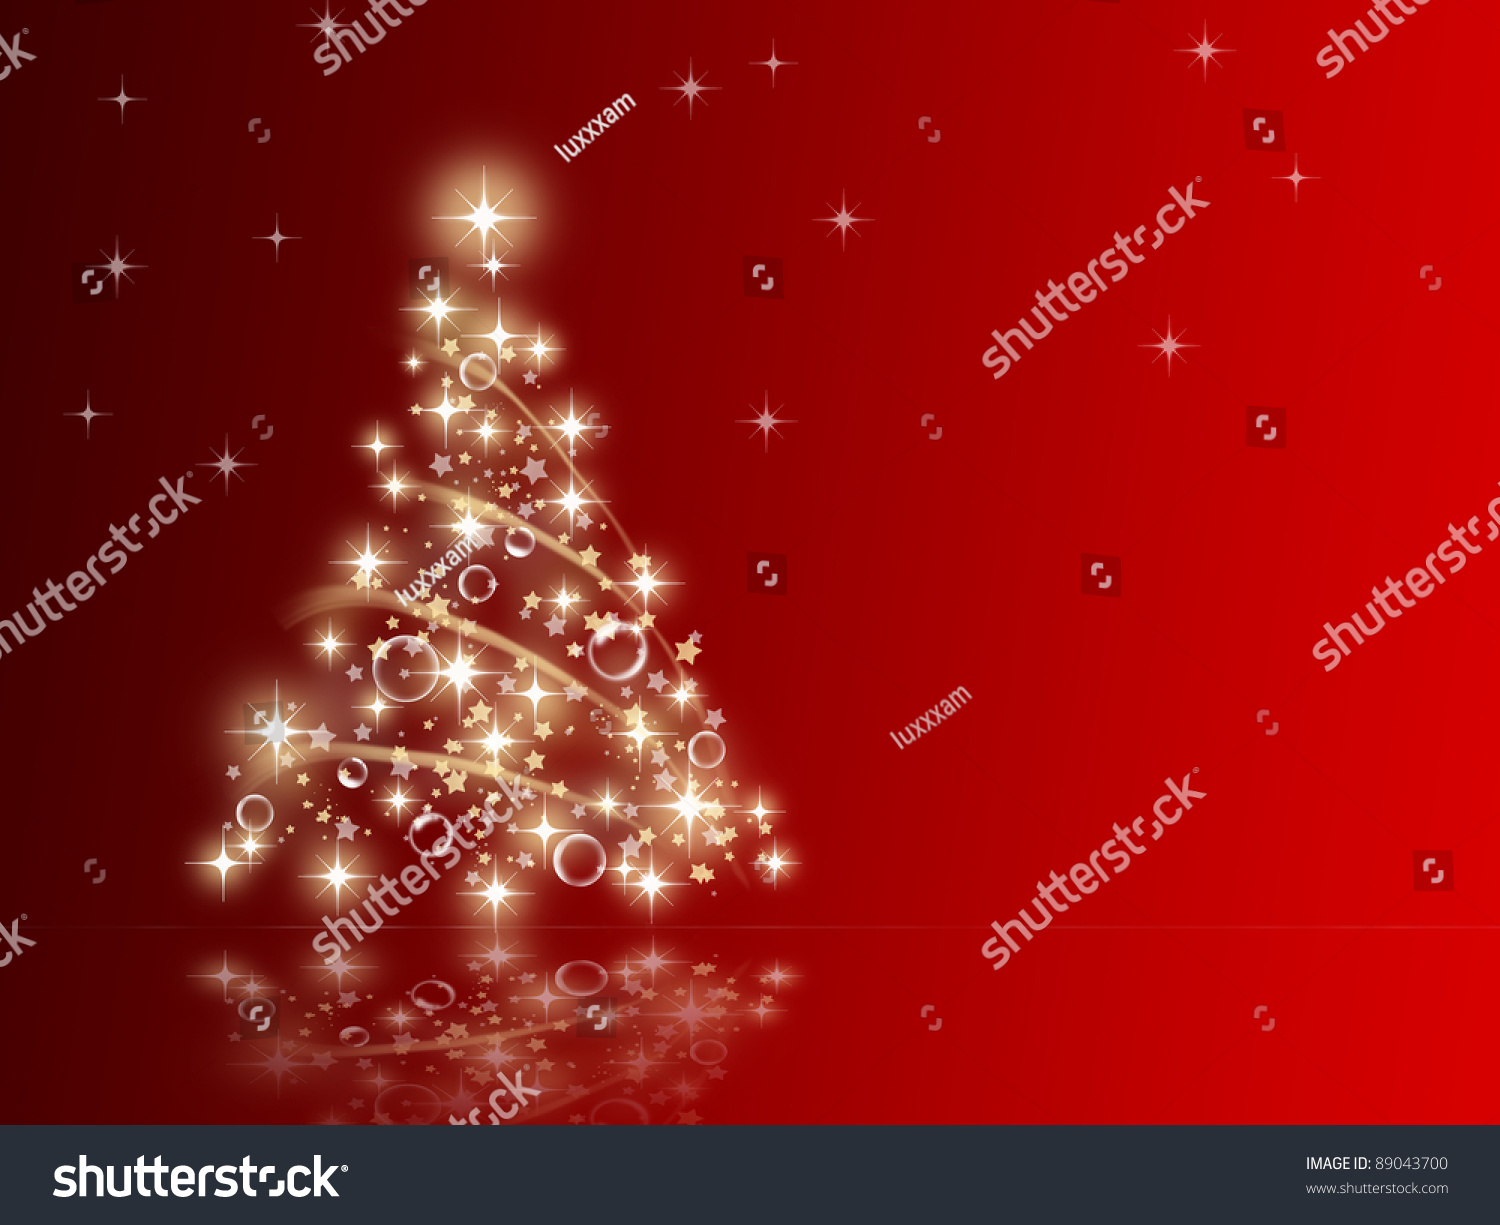 Illustration Of A Christmas Tree Made With Star On A Red Background ...